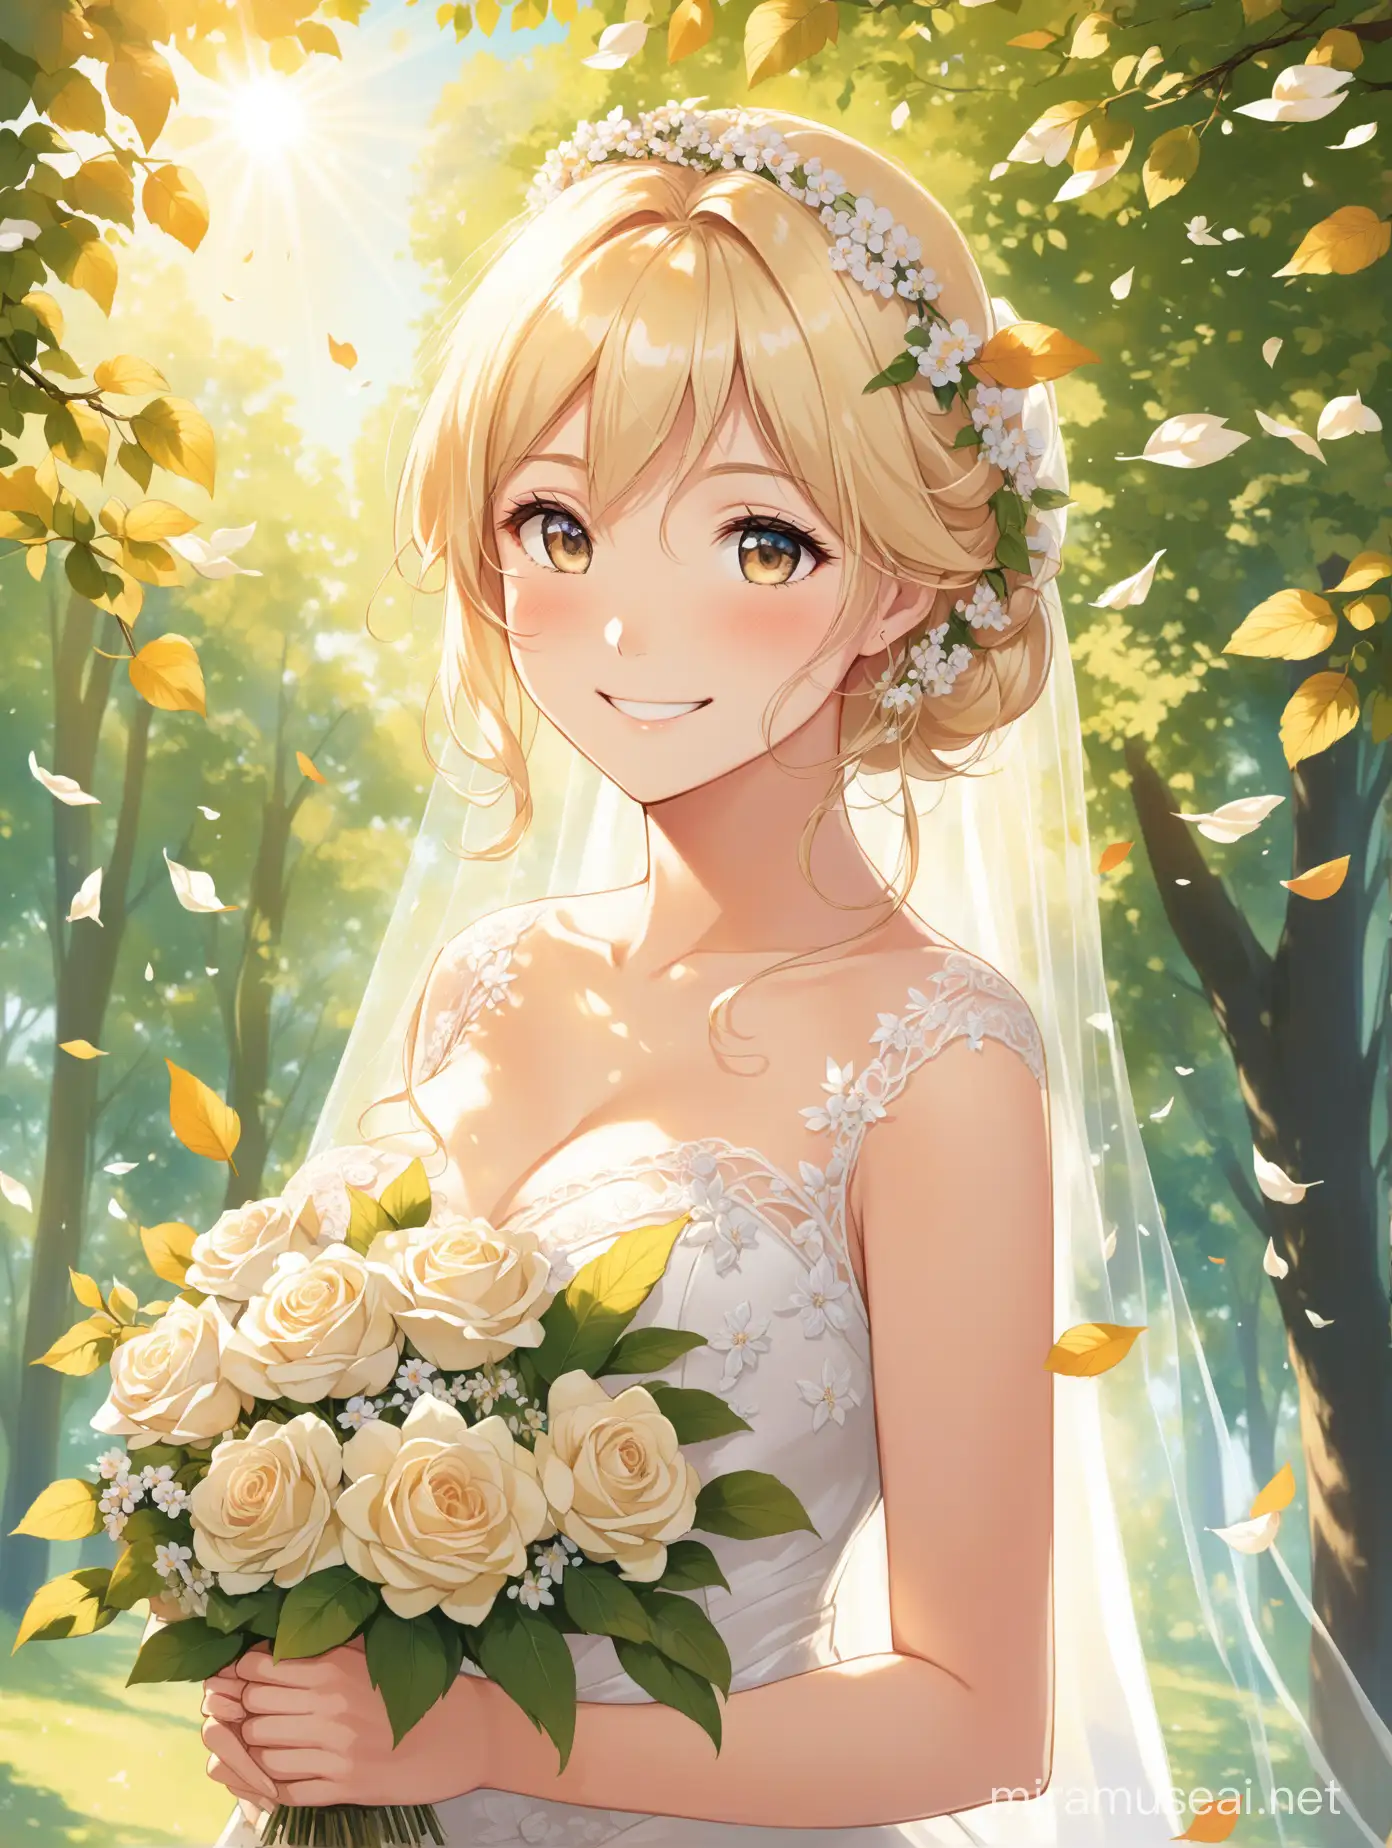 a blond bride smiling while flowers fly arround her half body in a sunny day with trees and sunlight coming trought the leafs